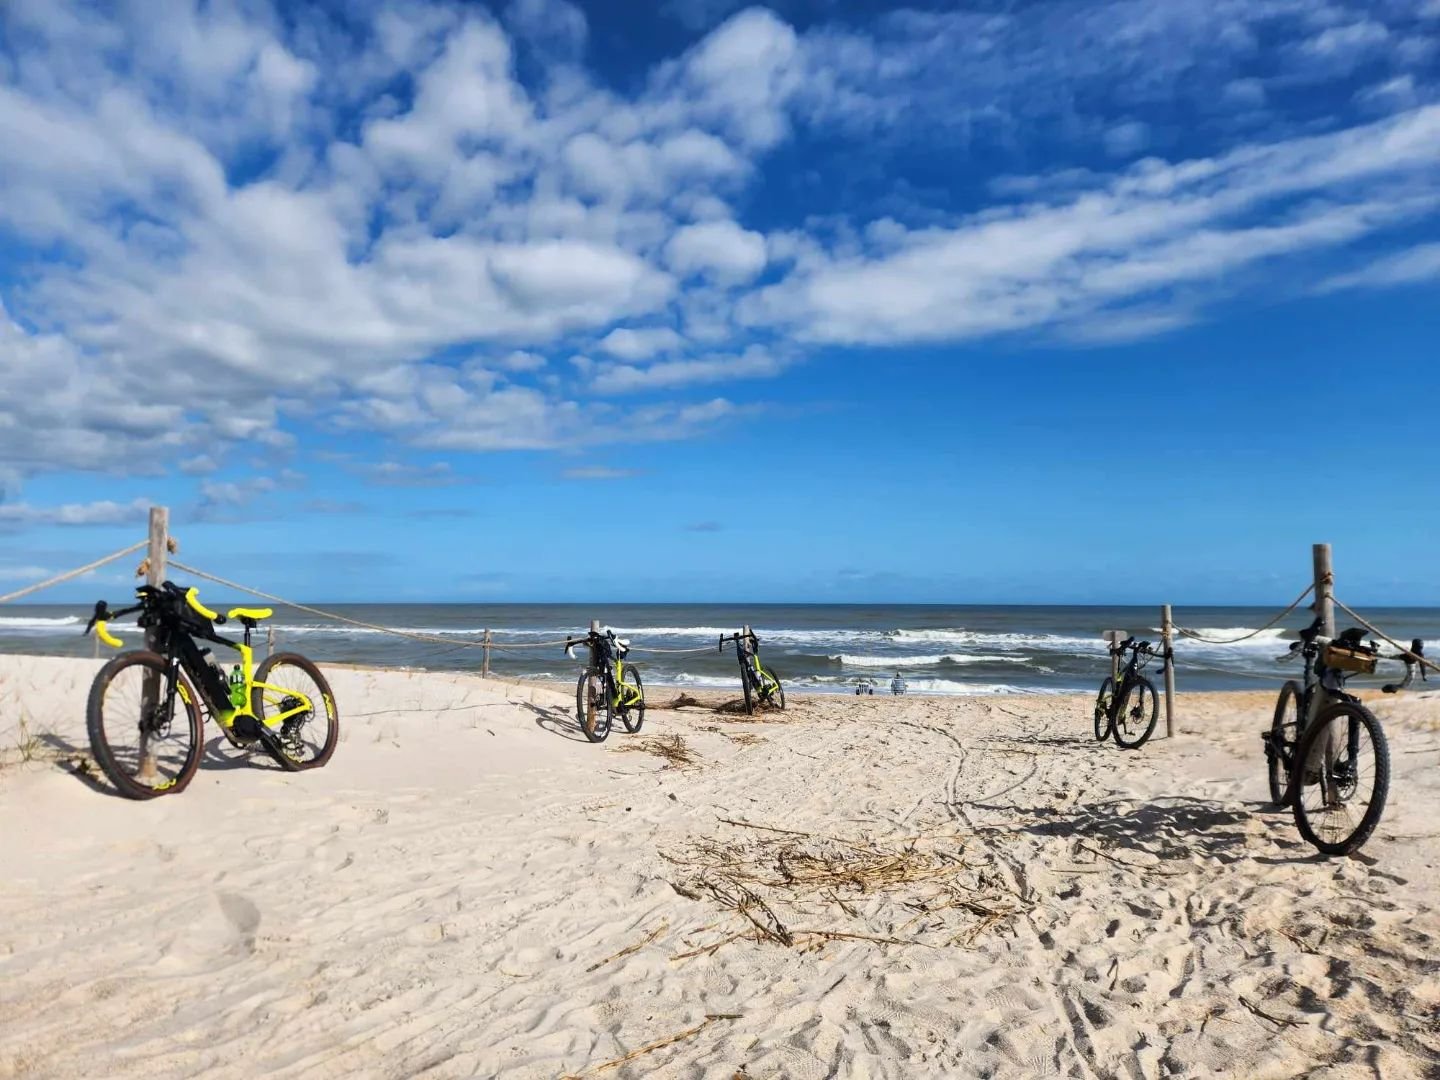 FIVE Rhoddie Topstone Neos at Vilano Beach in Florida. If you have yet to ride an eBike, it's a must. All kinds of riders can find a use and fun on an eBike!
&bull;
&bull;
&bull;
#ebike #electricbike #Cannondale #TopstoneNeo #bikelife #instacycling #